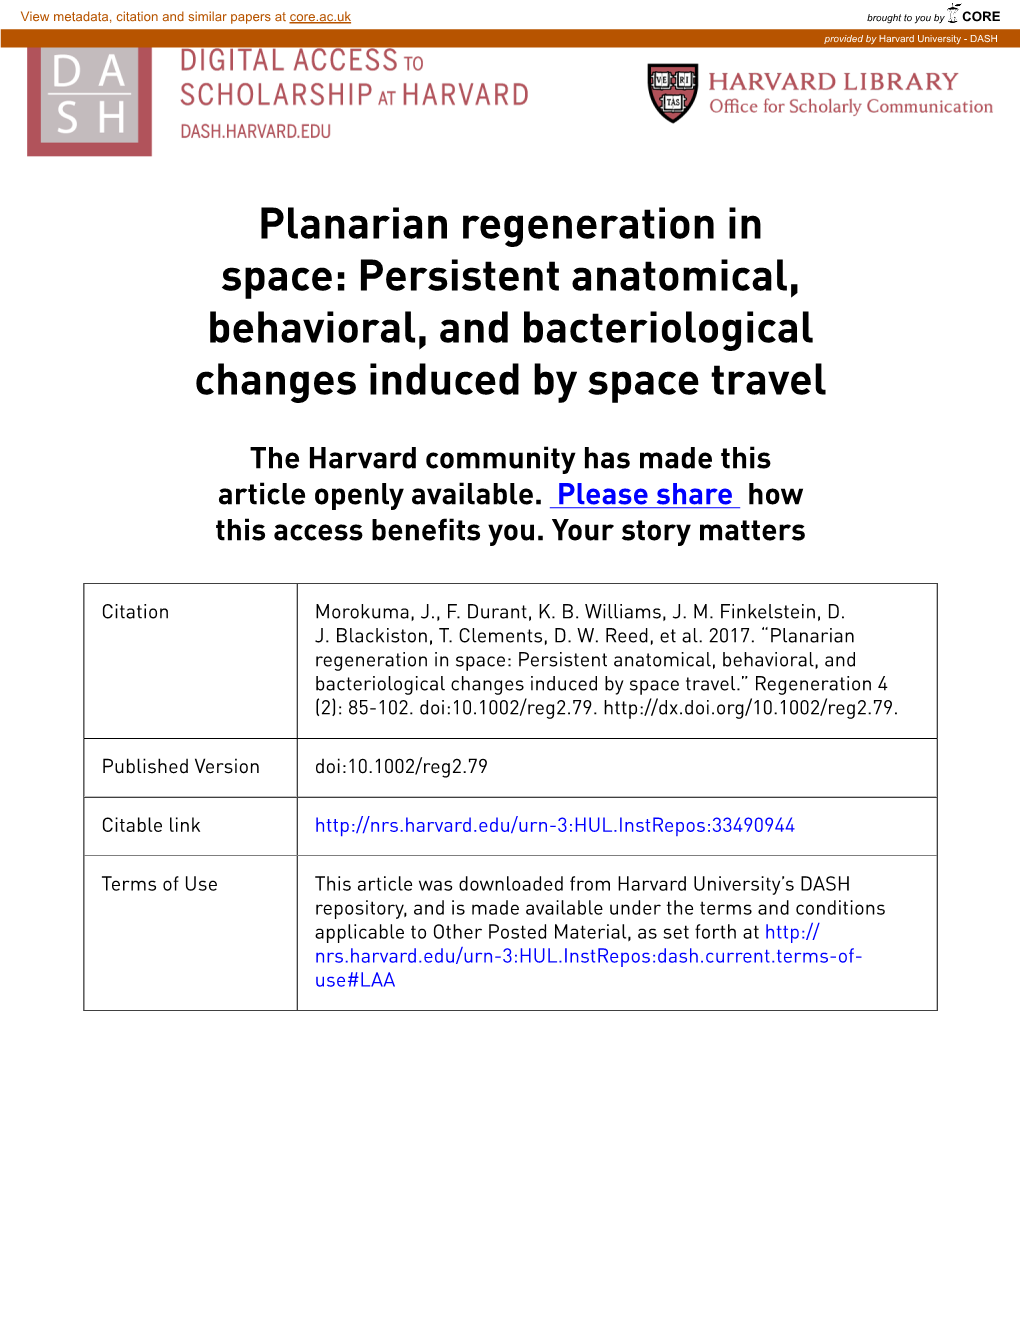 Planarian Regeneration in Space: Persistent Anatomical, Behavioral, and Bacteriological Changes Induced by Space Travel